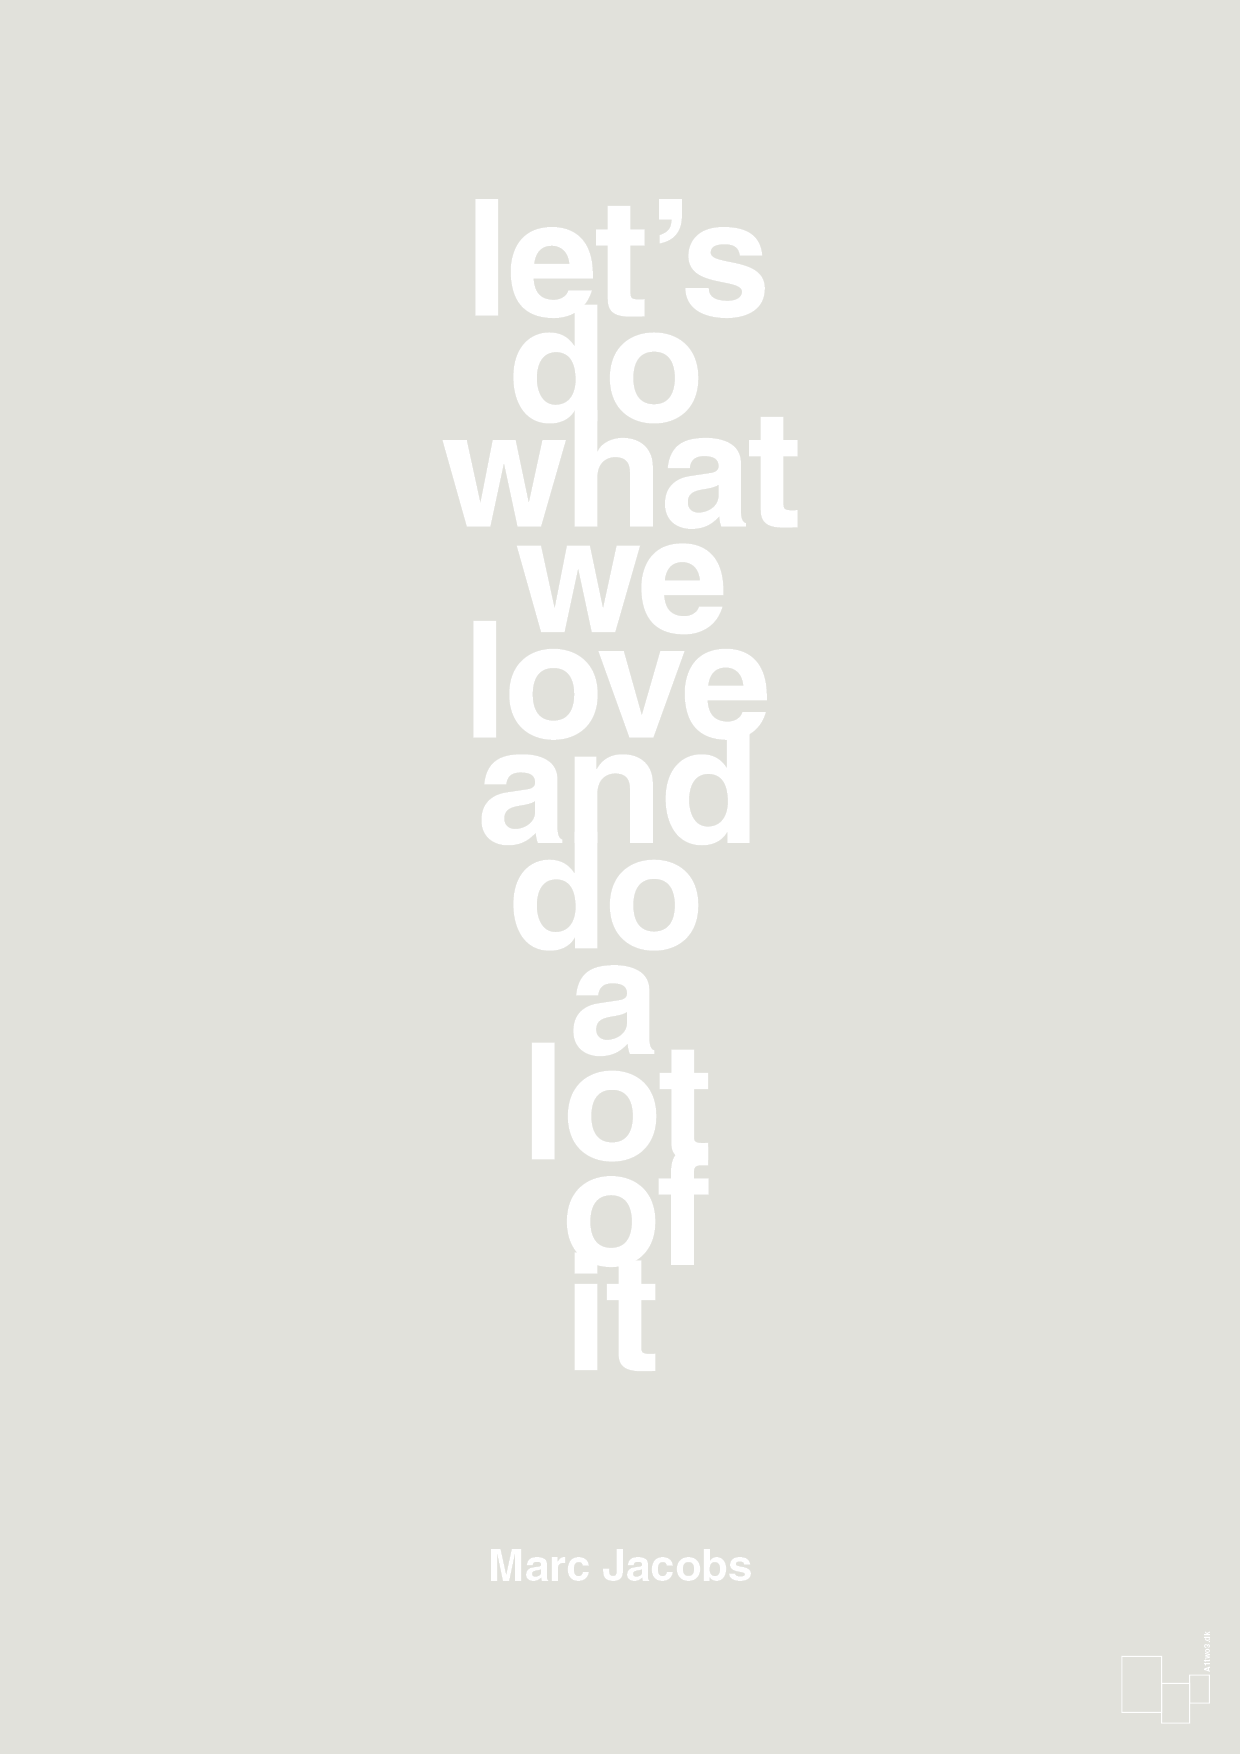 lets do what we love and do a lot of it - Plakat med Citater i Painters White